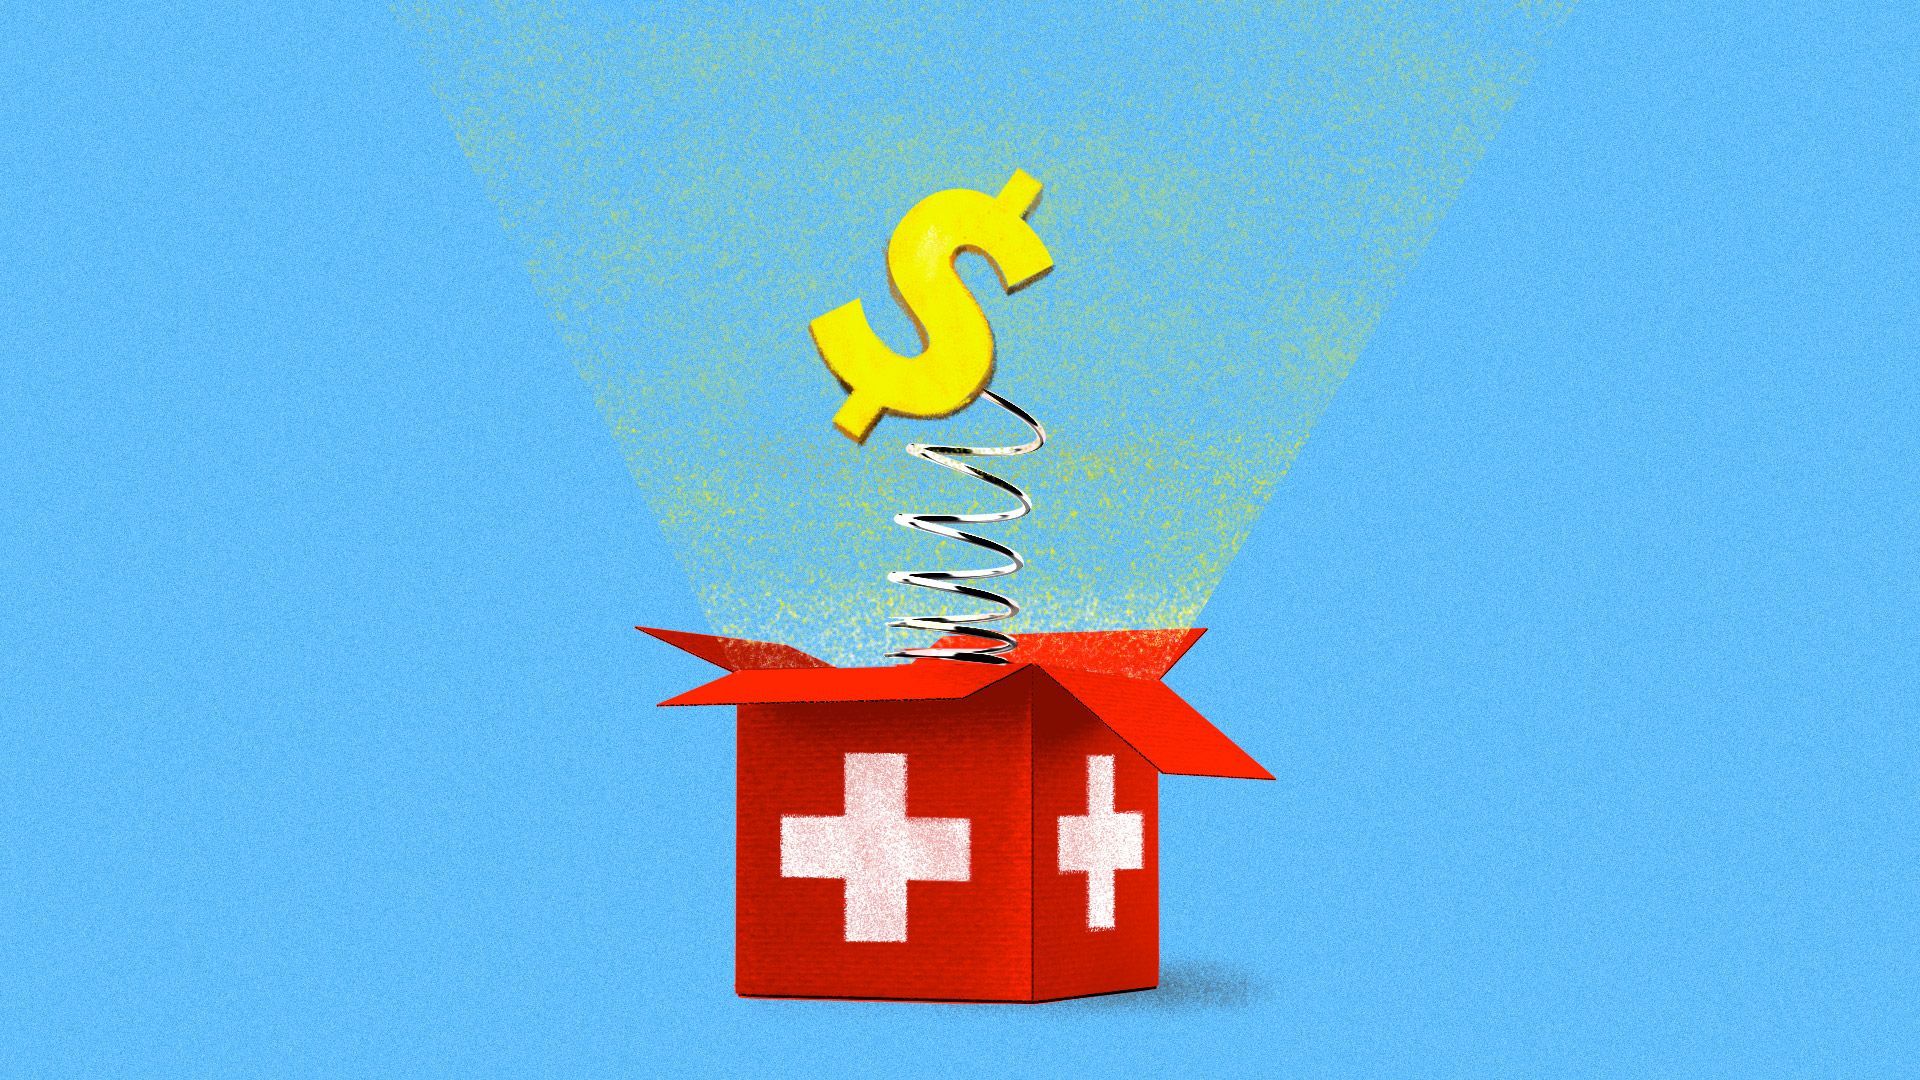 Illustration of a dollar sign springing out of a box with a healthcare cross on it.